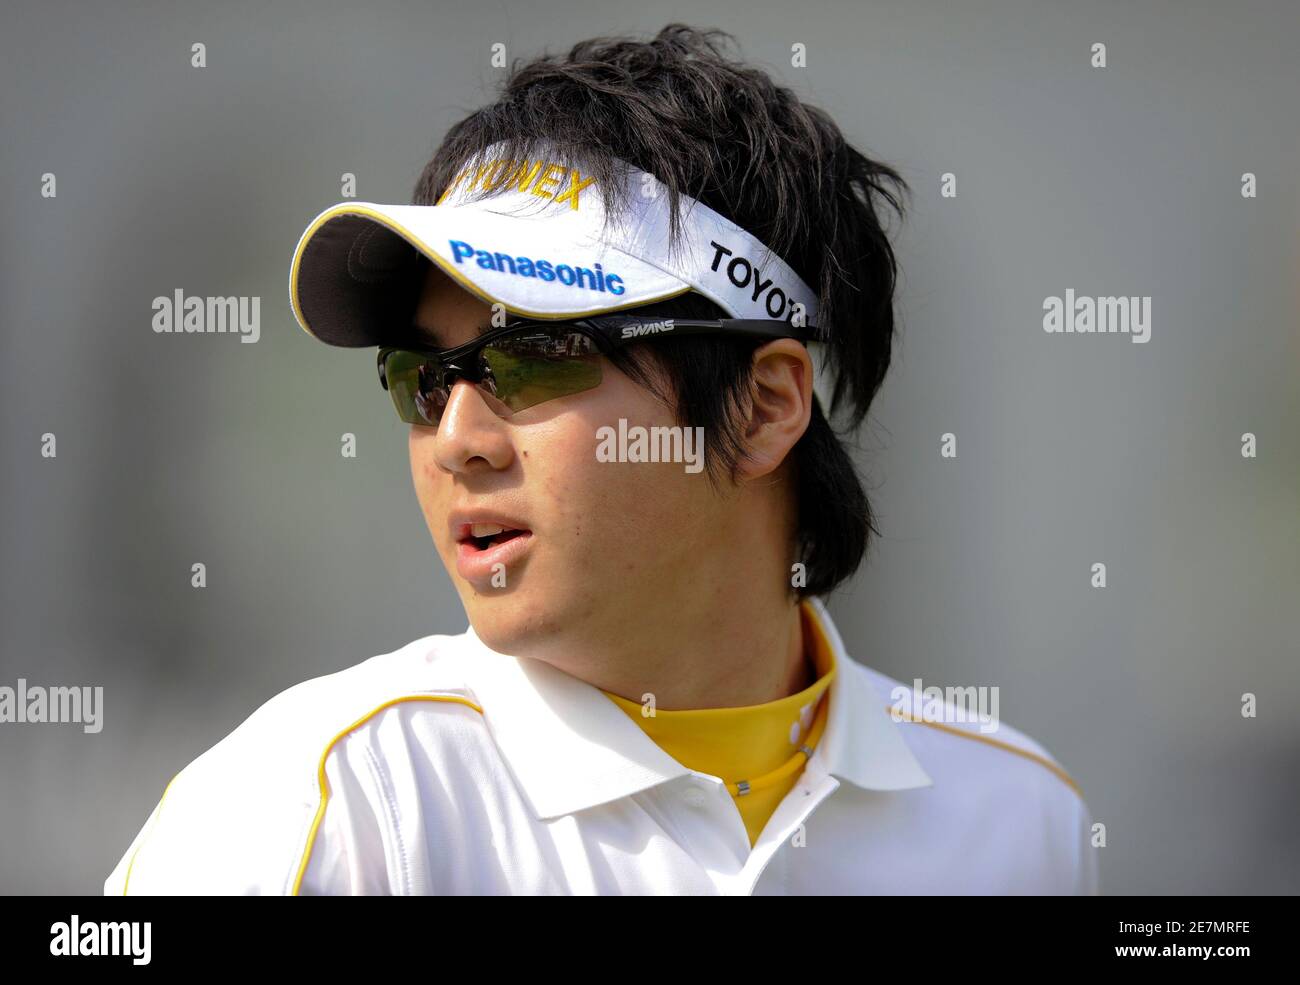 Golfer Ryo Ishikawa, 17, of Japan, makes his way down the ninth fairway during a practice round in preparation for the Northern Trust Open golf tournament in the Pacific Palisades area of Los Angeles February 17, 2009. REUTERS/Gus Ruelas (UNITED STATES) Stock Photo